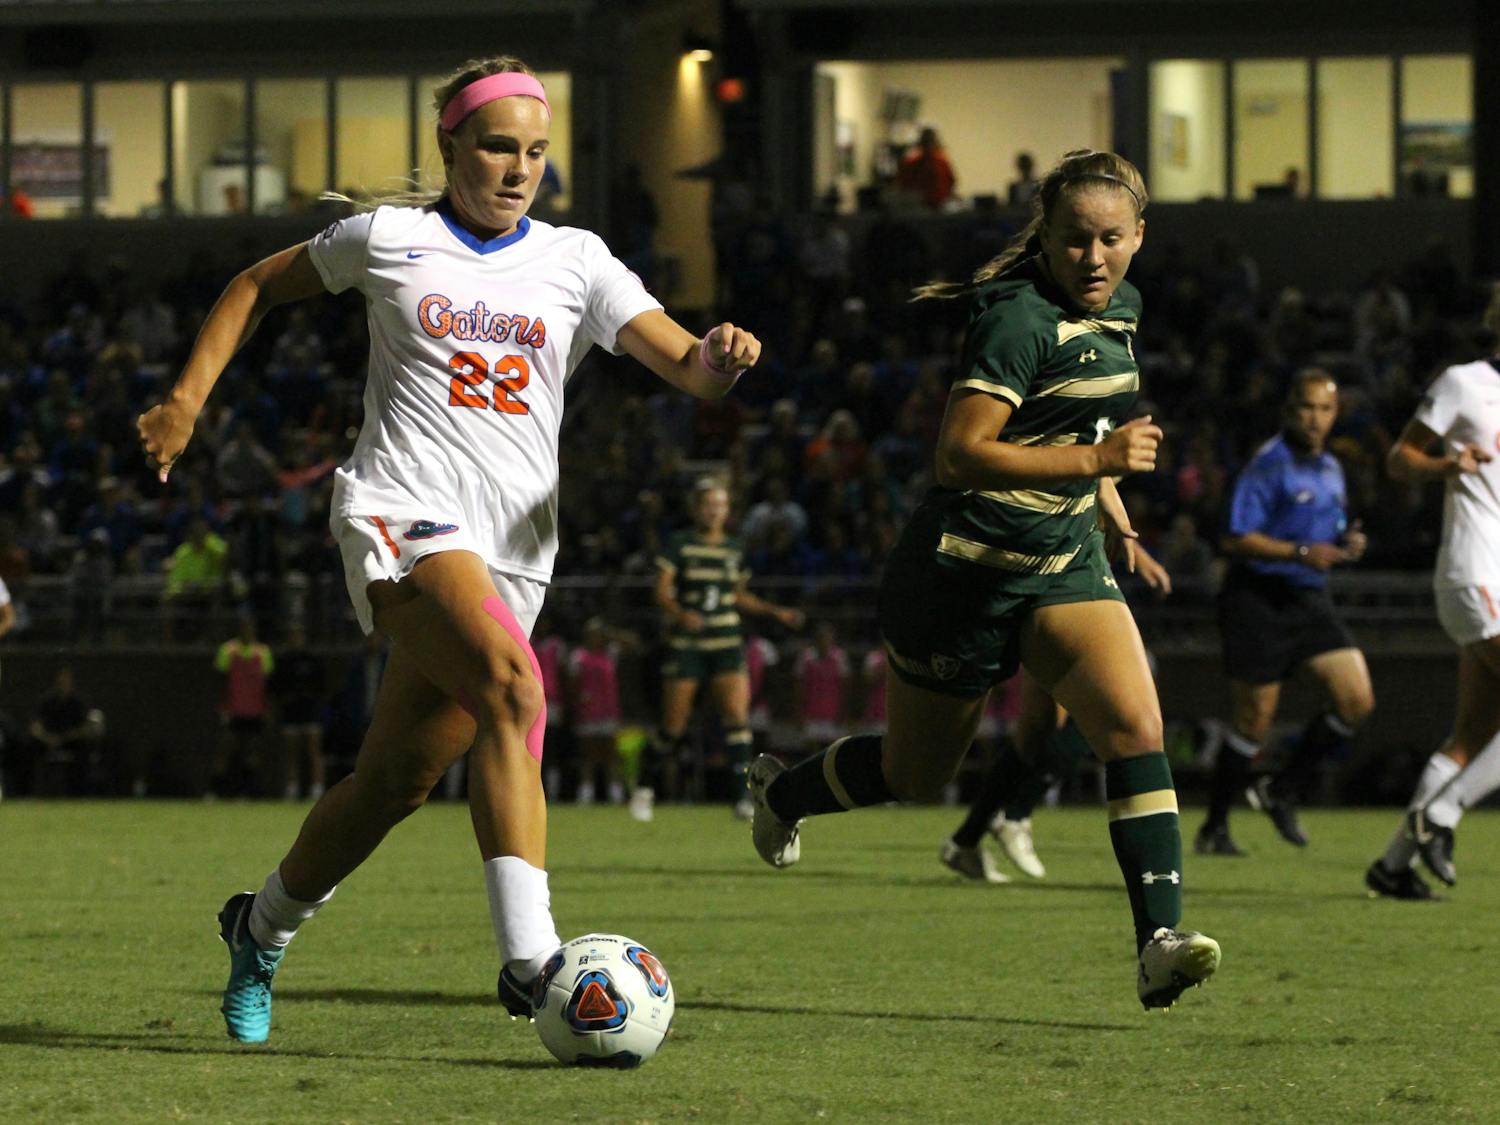 Redshirt junior midfielder Parker Roberts missed most of last season with a foot fracture. She's expected to play a key role on the Gators' team this fall. Roberts earned First Team All-SEC honors in 2017.